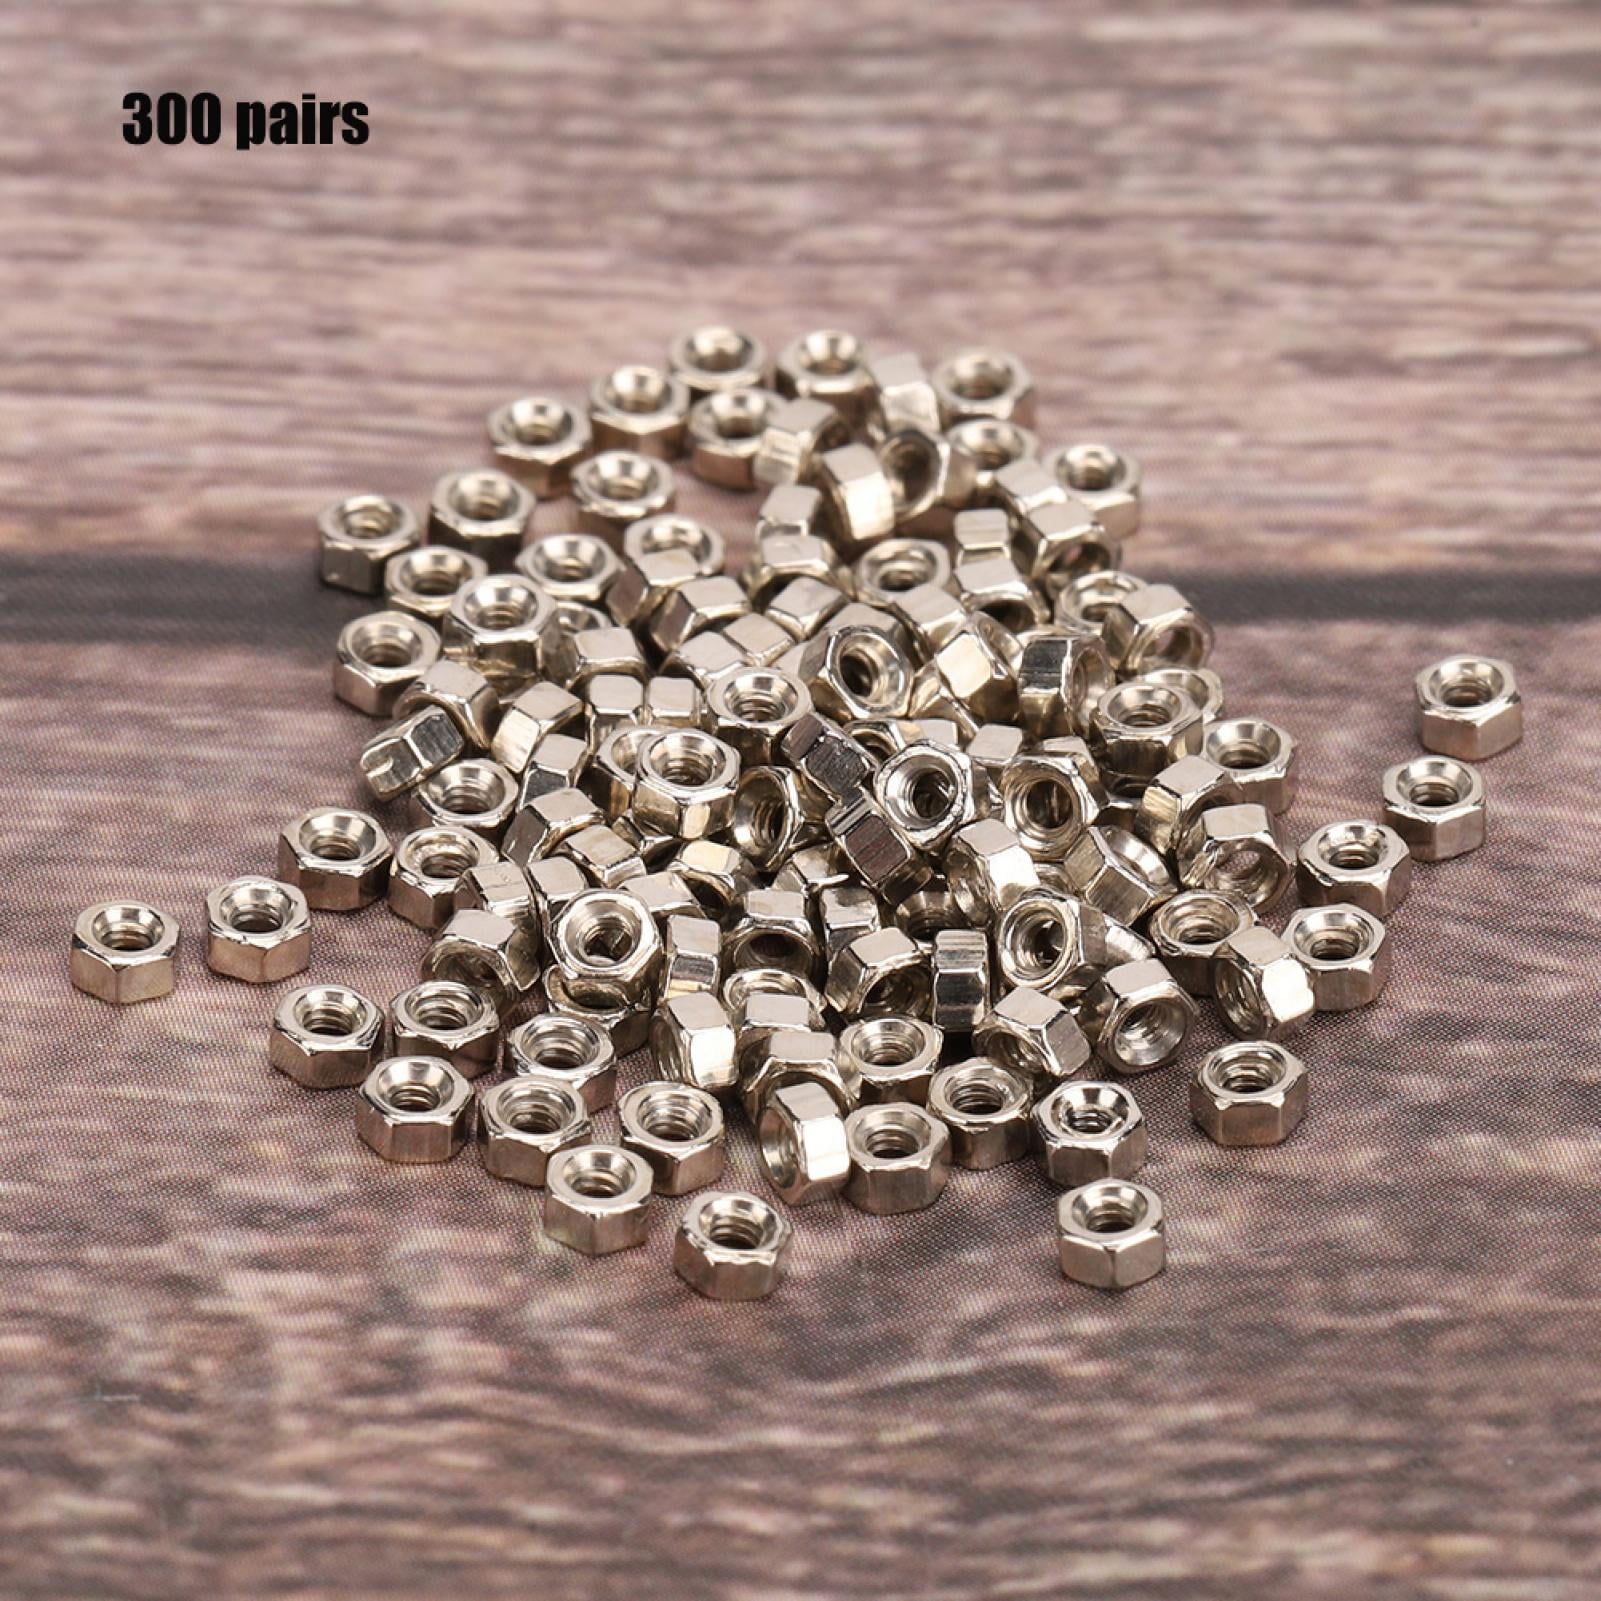 Details about   Screw For 300 Pairs Frameless Glasses Nuts Nut Cap 1.4 Parts Repair Stainless 